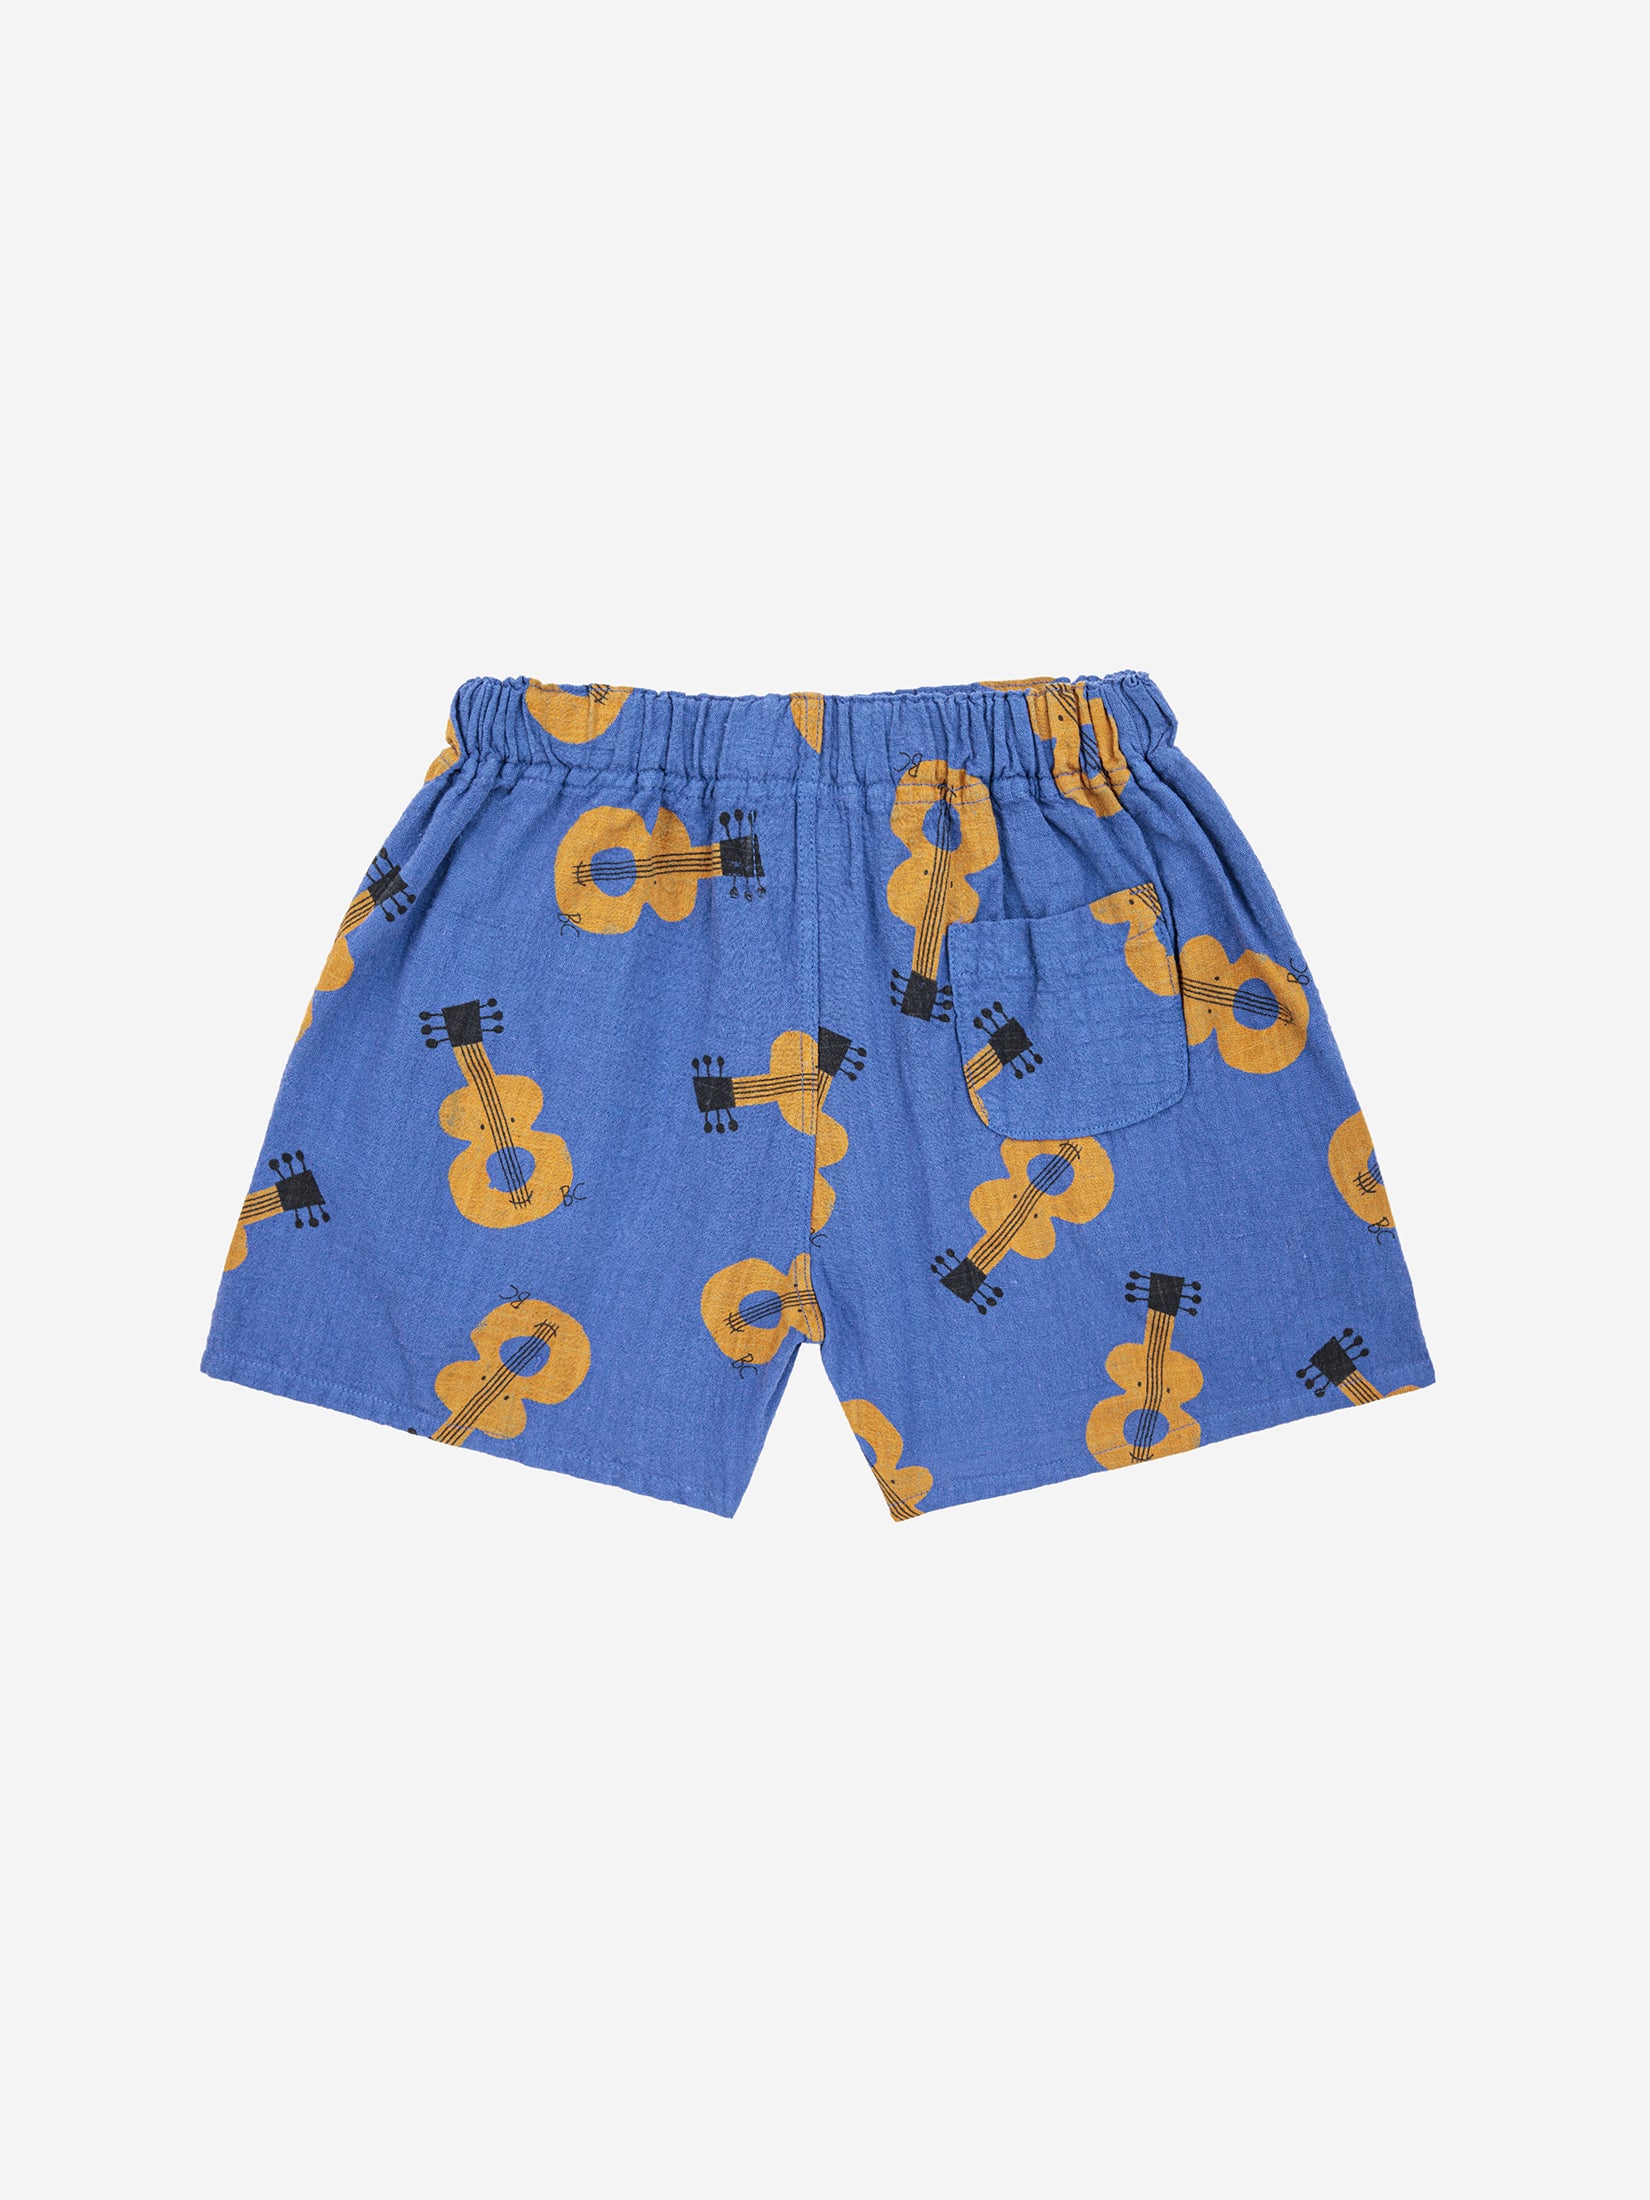 Bobo Choses Acoustic Guitar All Over Woven Shorts - Navy Blue